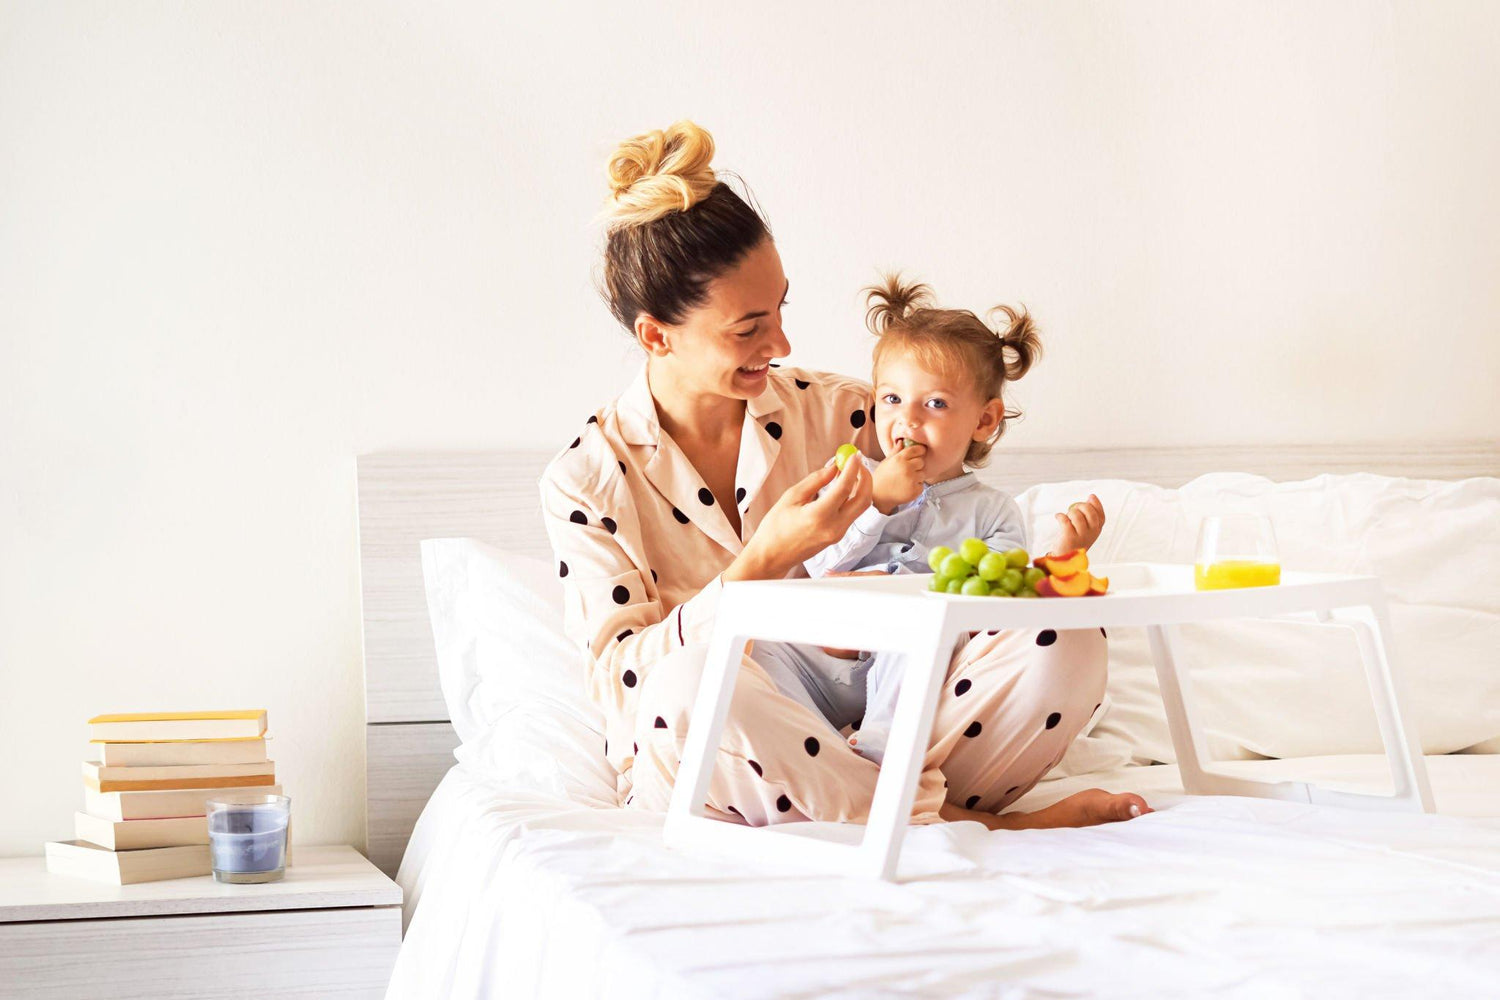 A mother in polka-dot pajamas feeding her toddler at a small white table on a bed, both smiling, with books and a juice glass nearby.